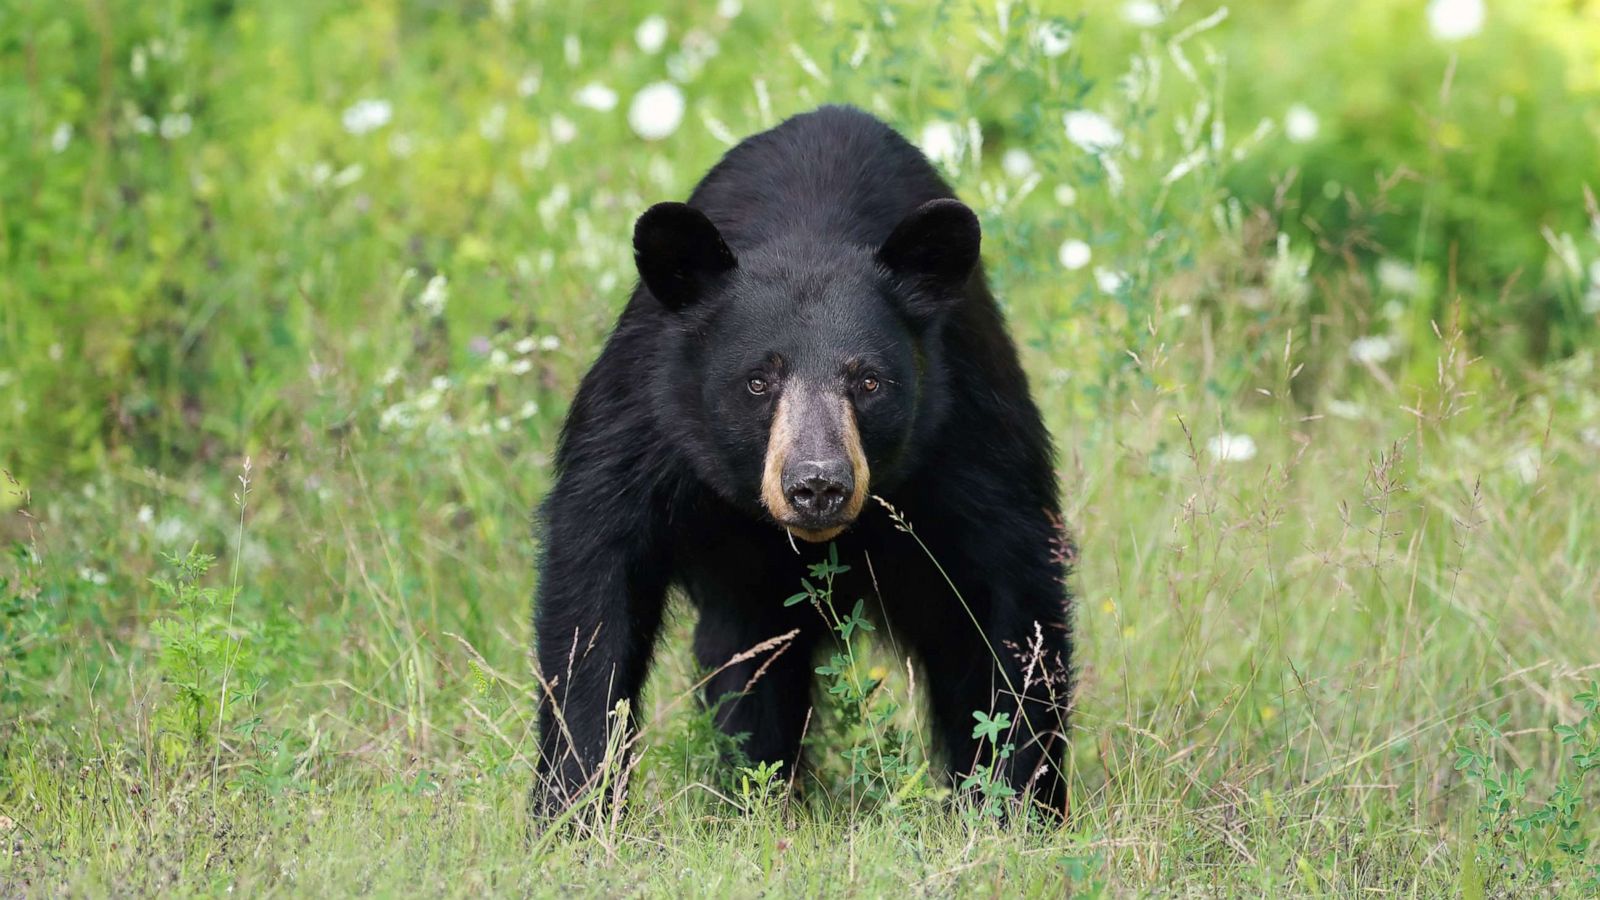 Black bear attacks on humans are rare but often begin as scuffles with  dogs, experts say - ABC News